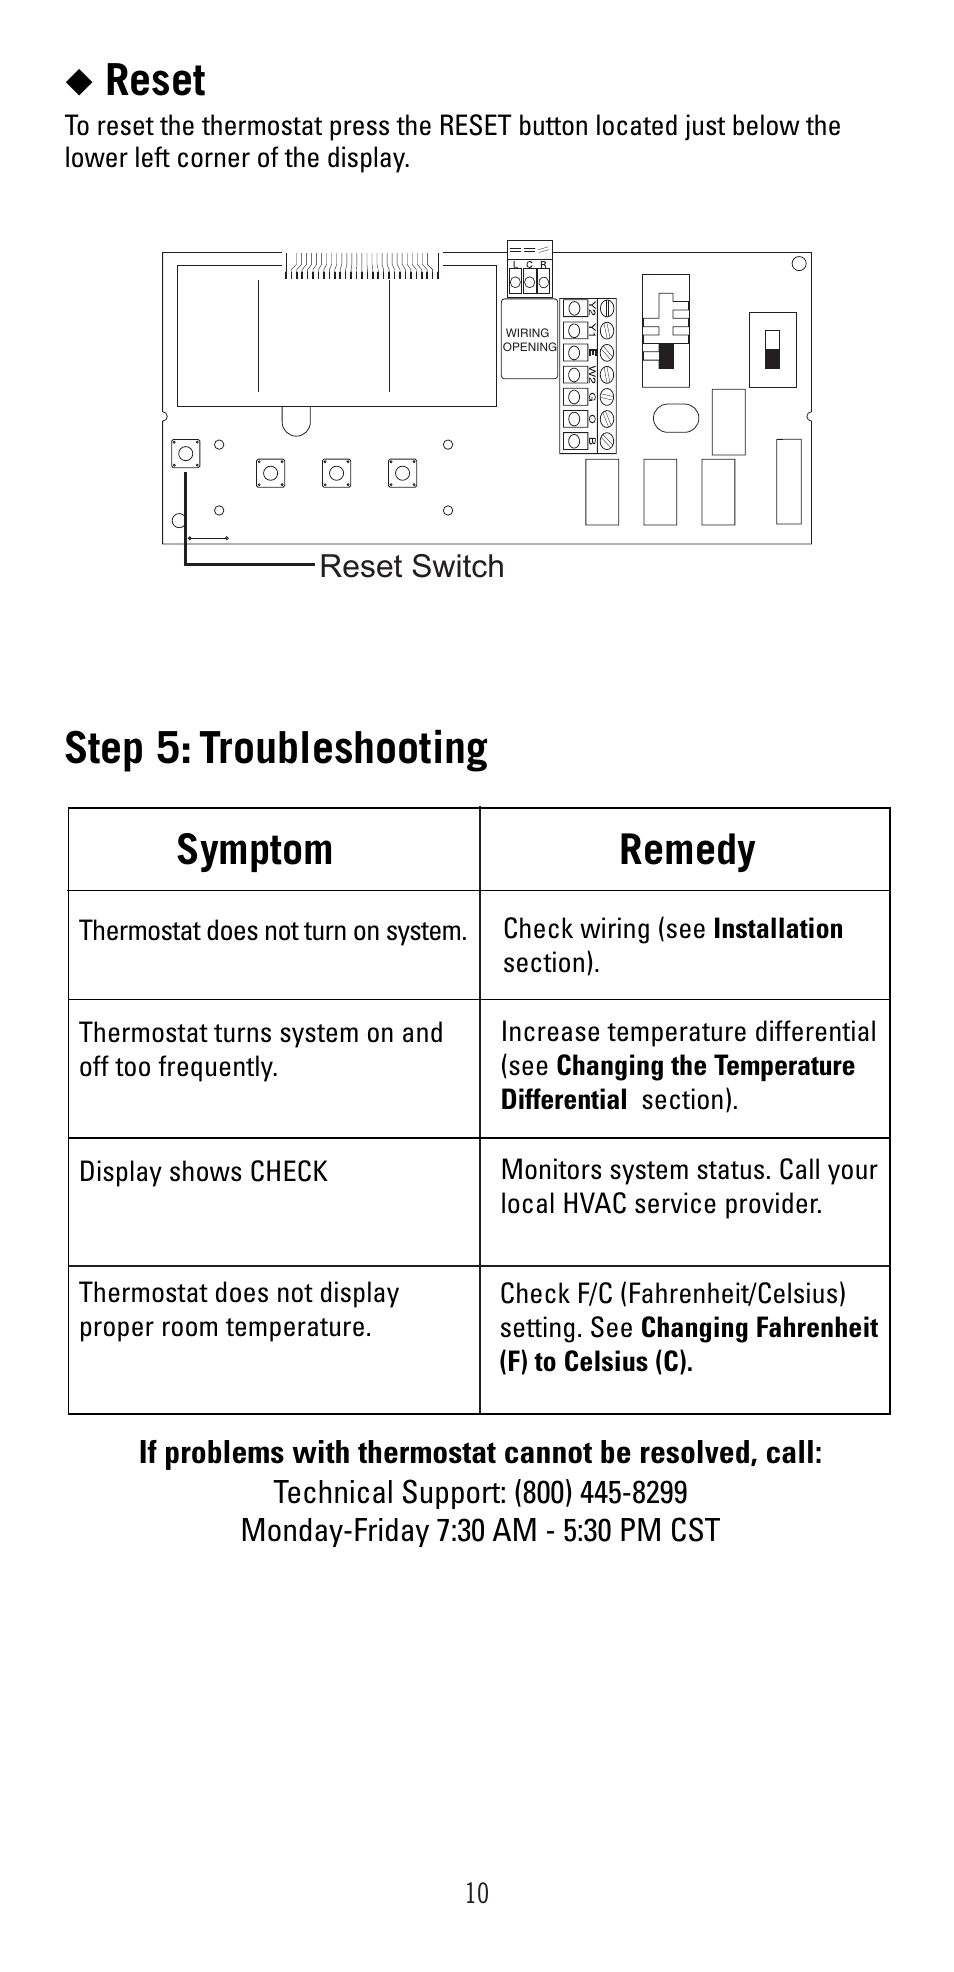 Reset, Step 5: troubleshooting, Symptom remedy | Robertshaw 9420 User Manual  | Page 10 / 12  Robertshaw 9420 Thermostat Wiring Diagram    Manuals Directory